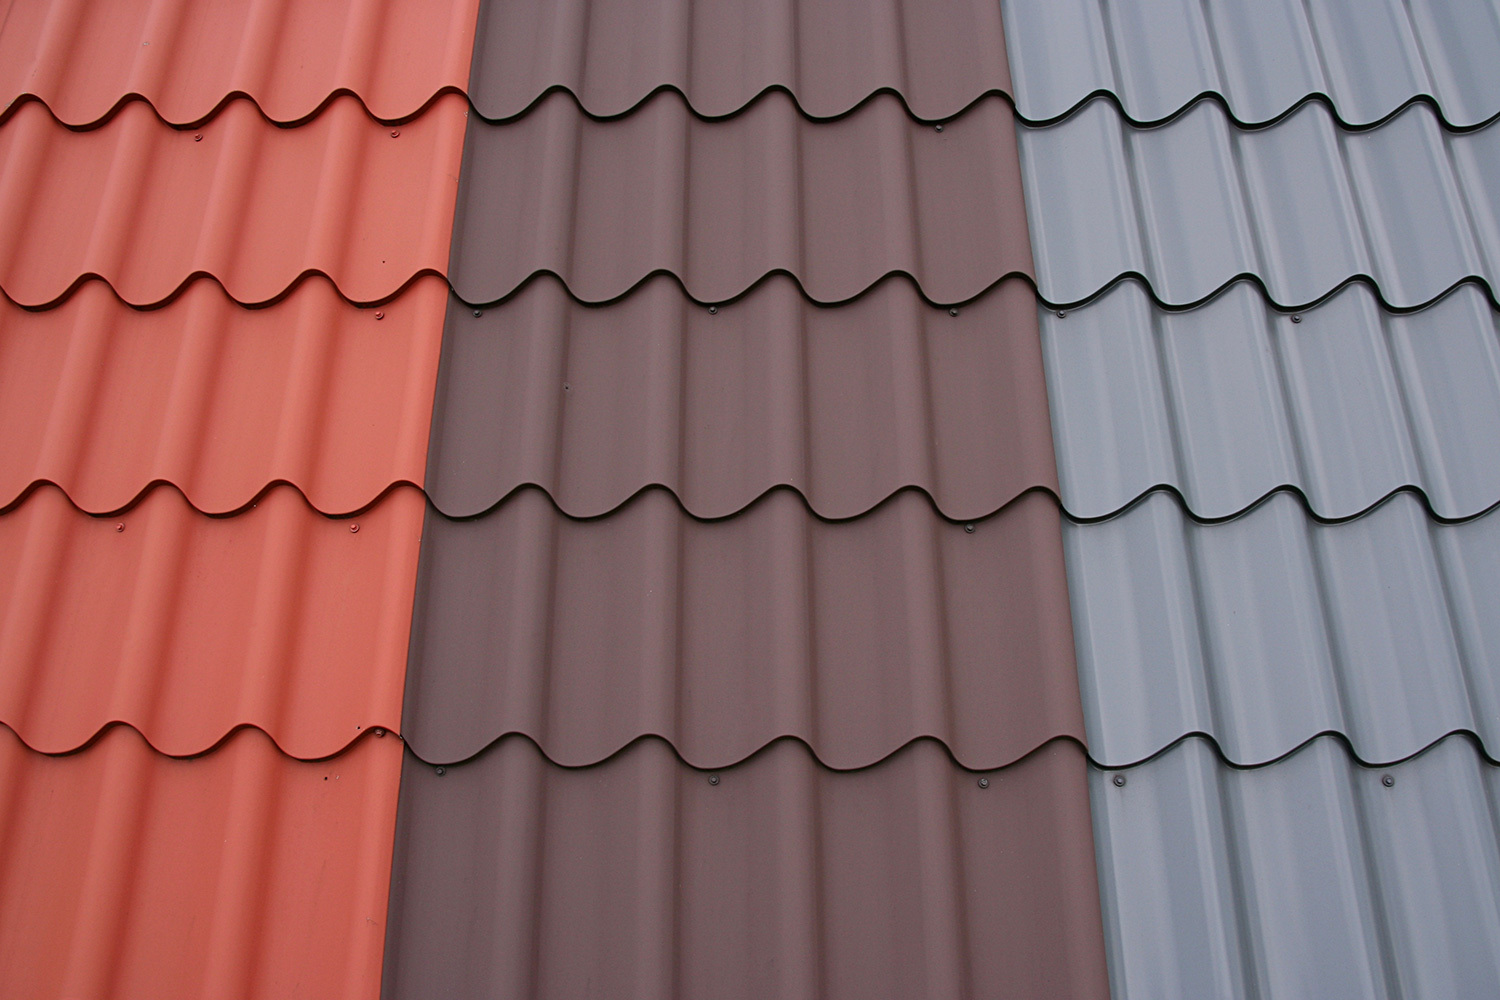 <span style="font-weight: bold;">Roofing Sheets&nbsp;</span>